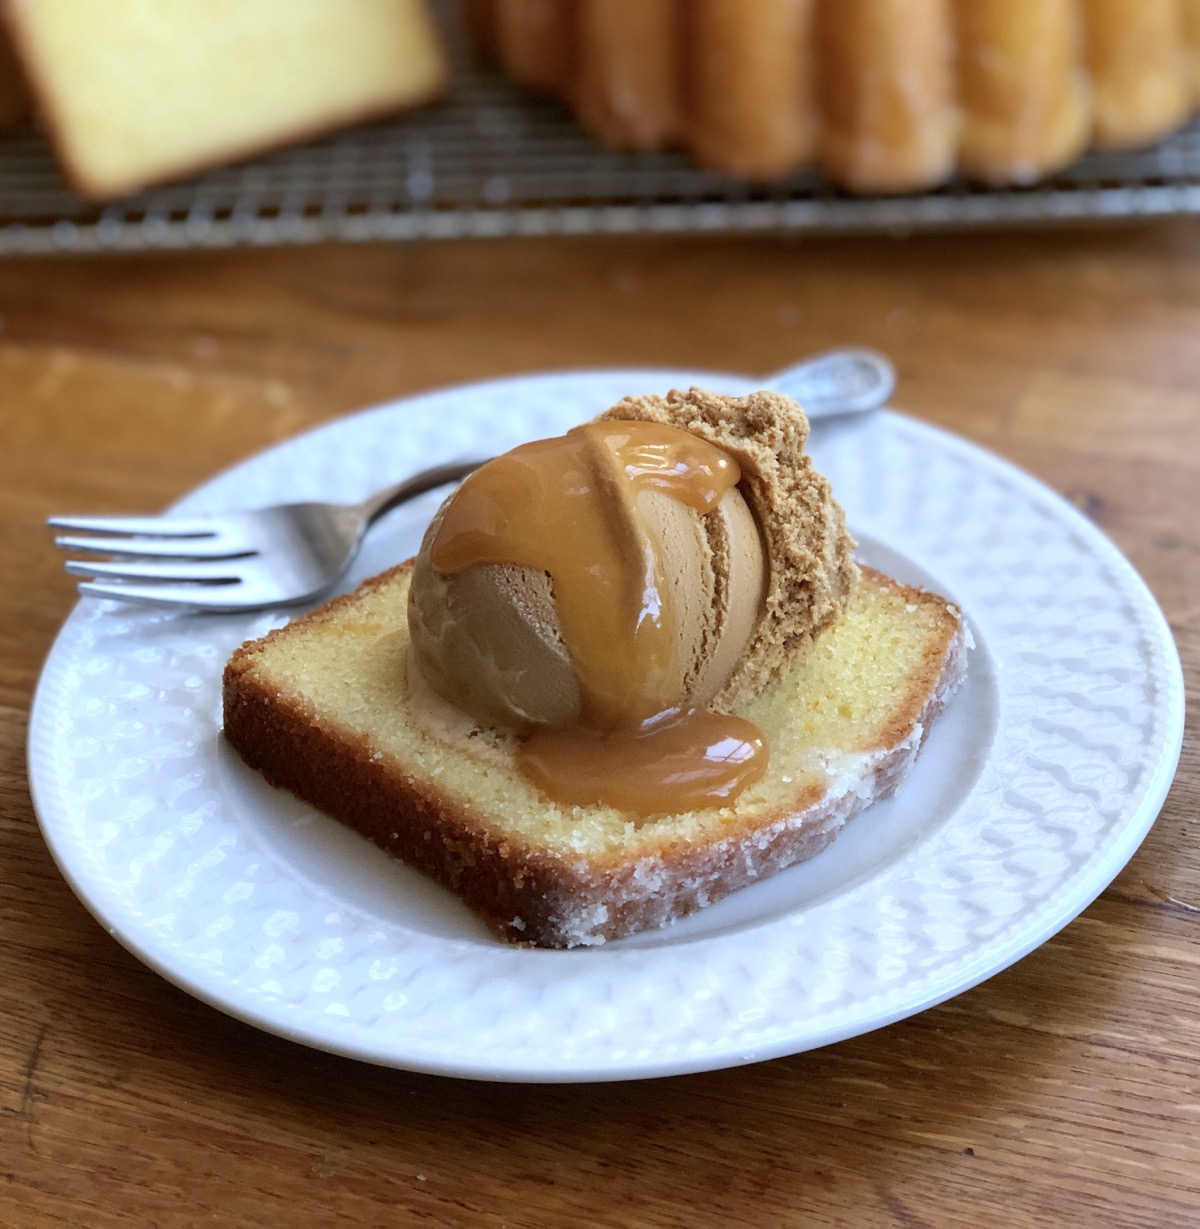 Slice of orange pound cake topped with caramel ice cream and drizzled with butterscotch sauce.